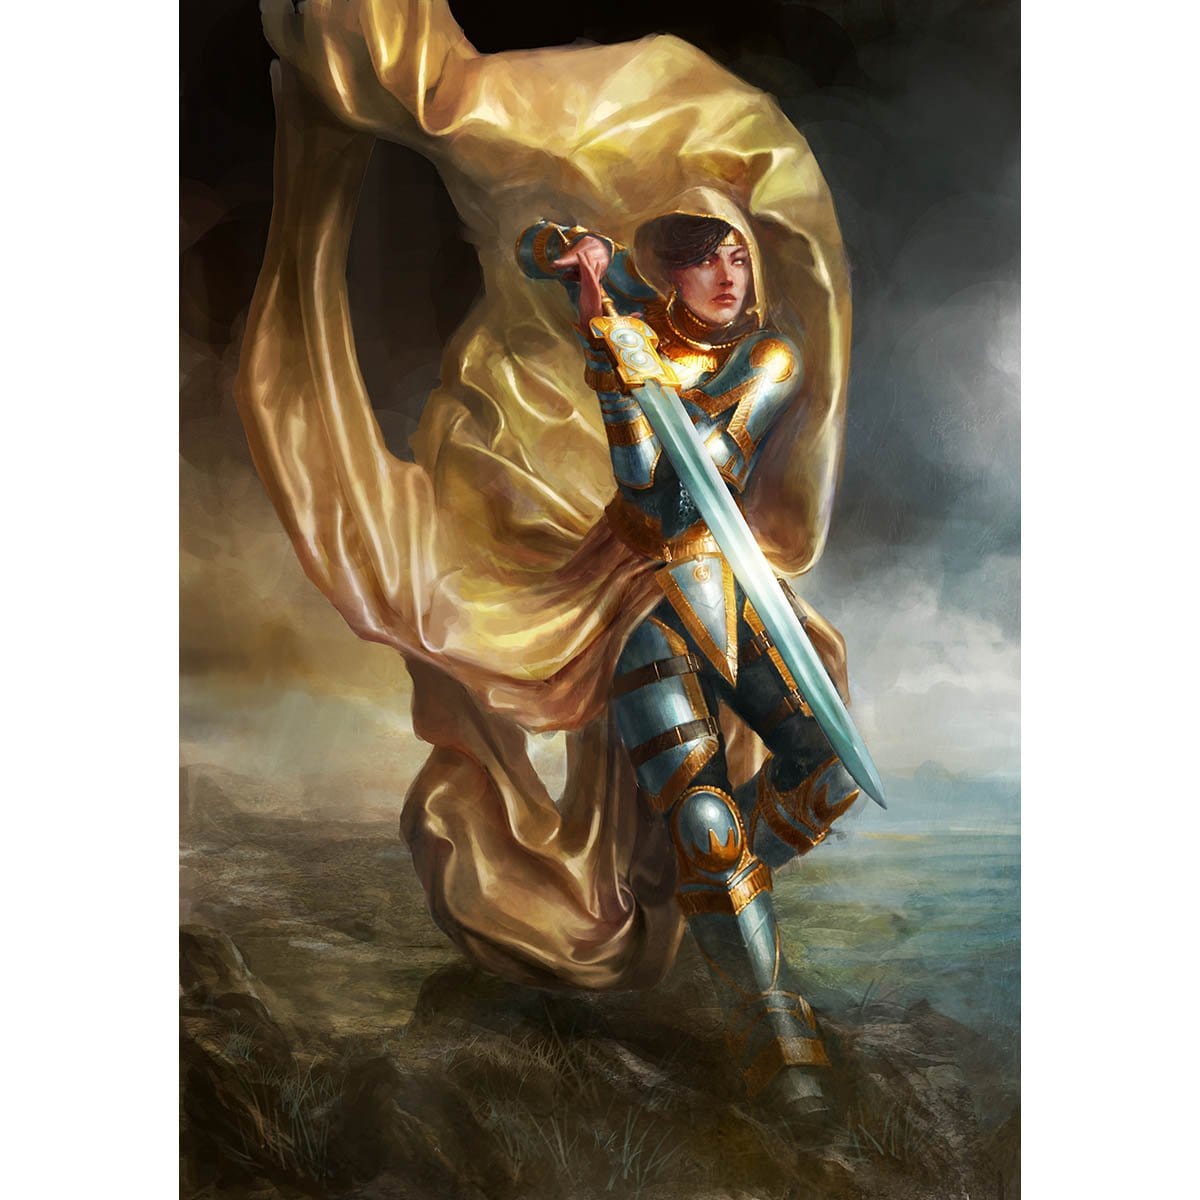 Elspeth, Knight-Errant Print - Print - Original Magic Art - Accessories for Magic the Gathering and other card games